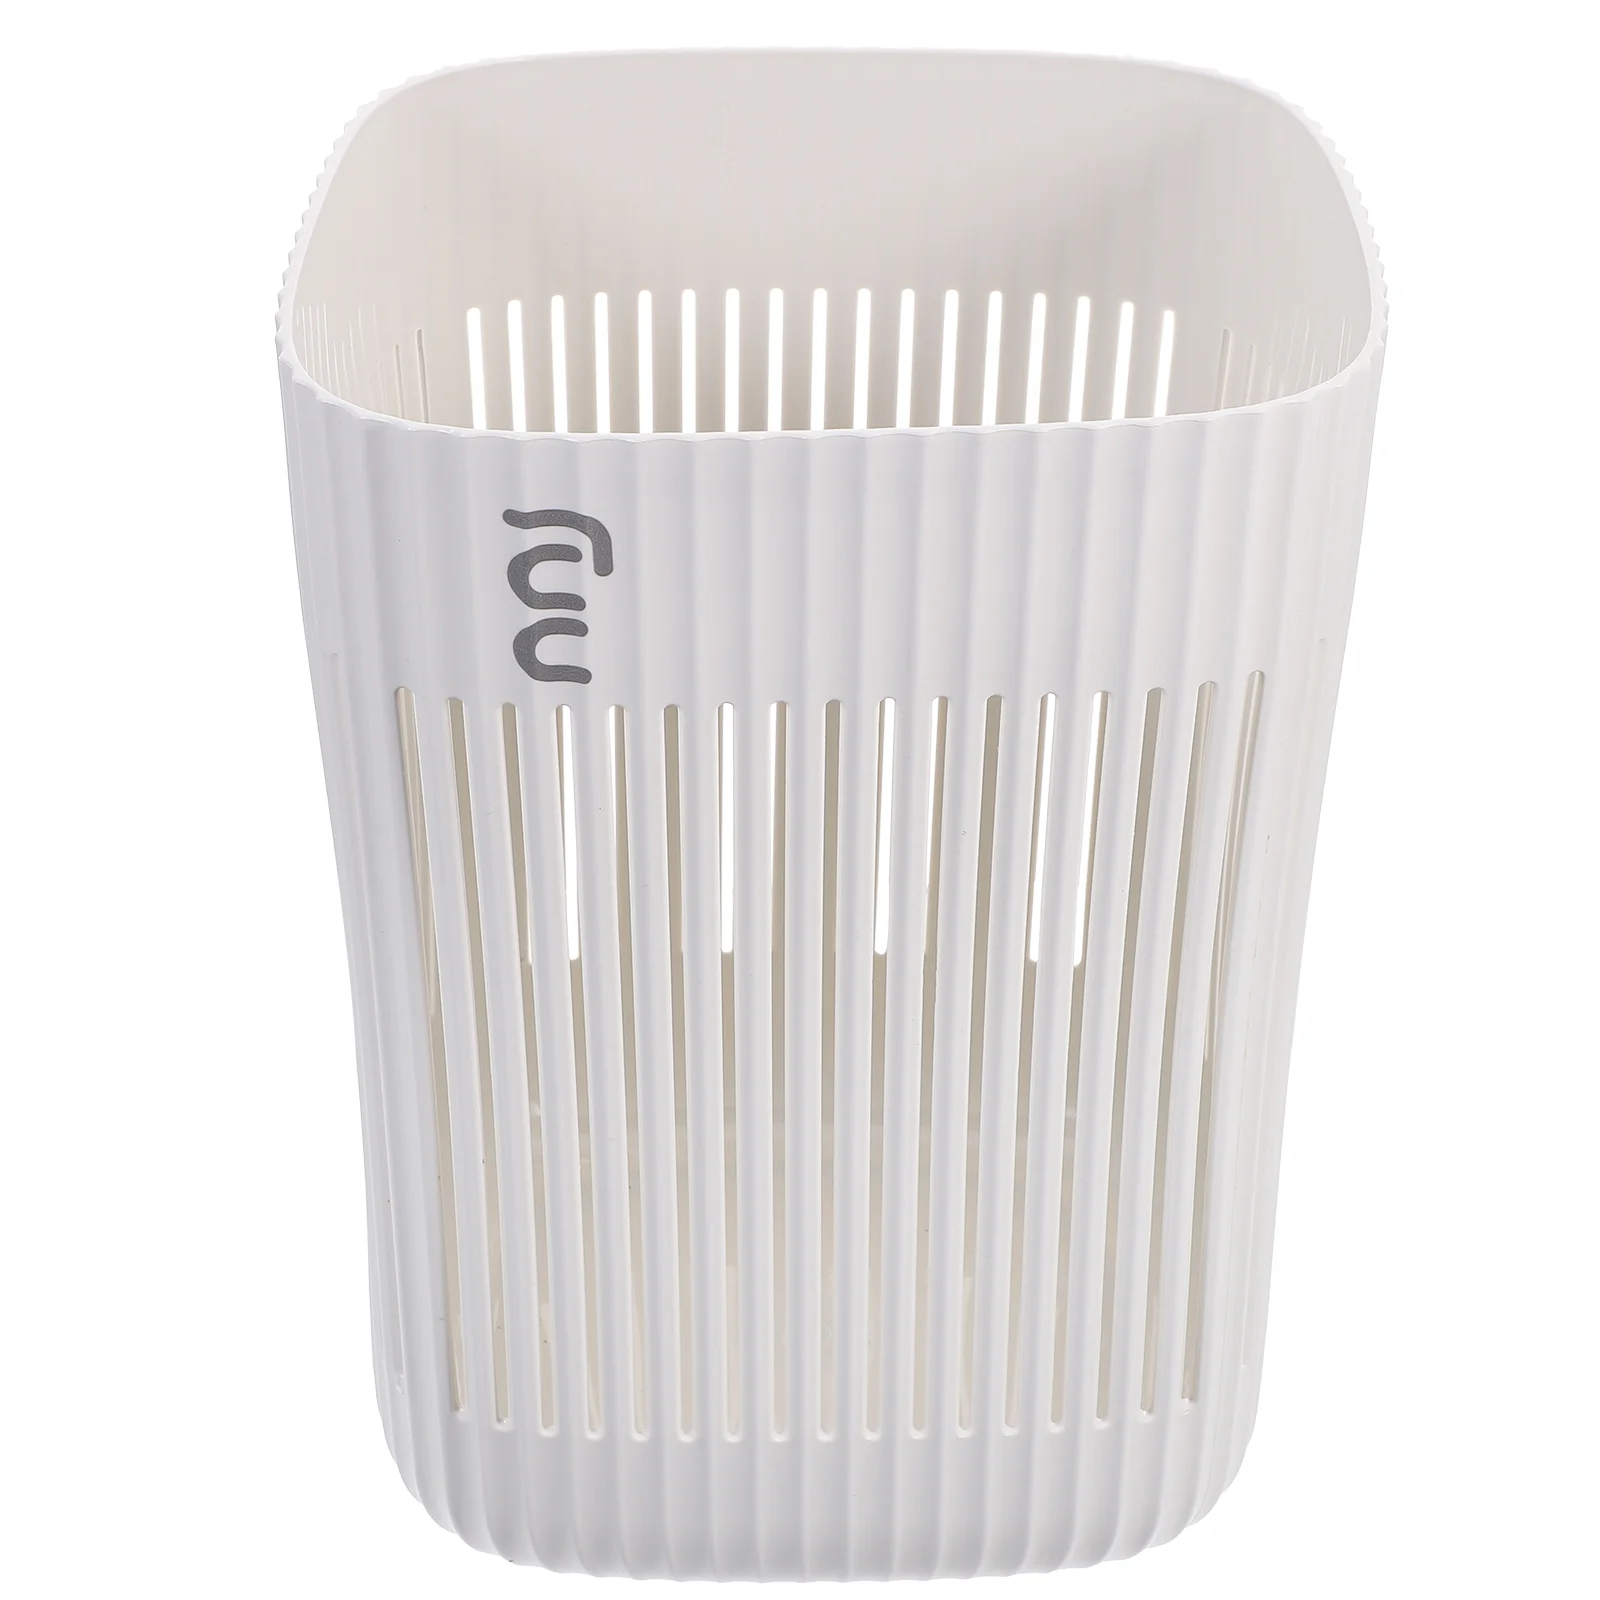 

Waste Can Waste Paper Basket Wastebasket Garbage Container Bin Recycling Bin for Bathroom Kitchen Home Office Separate trash